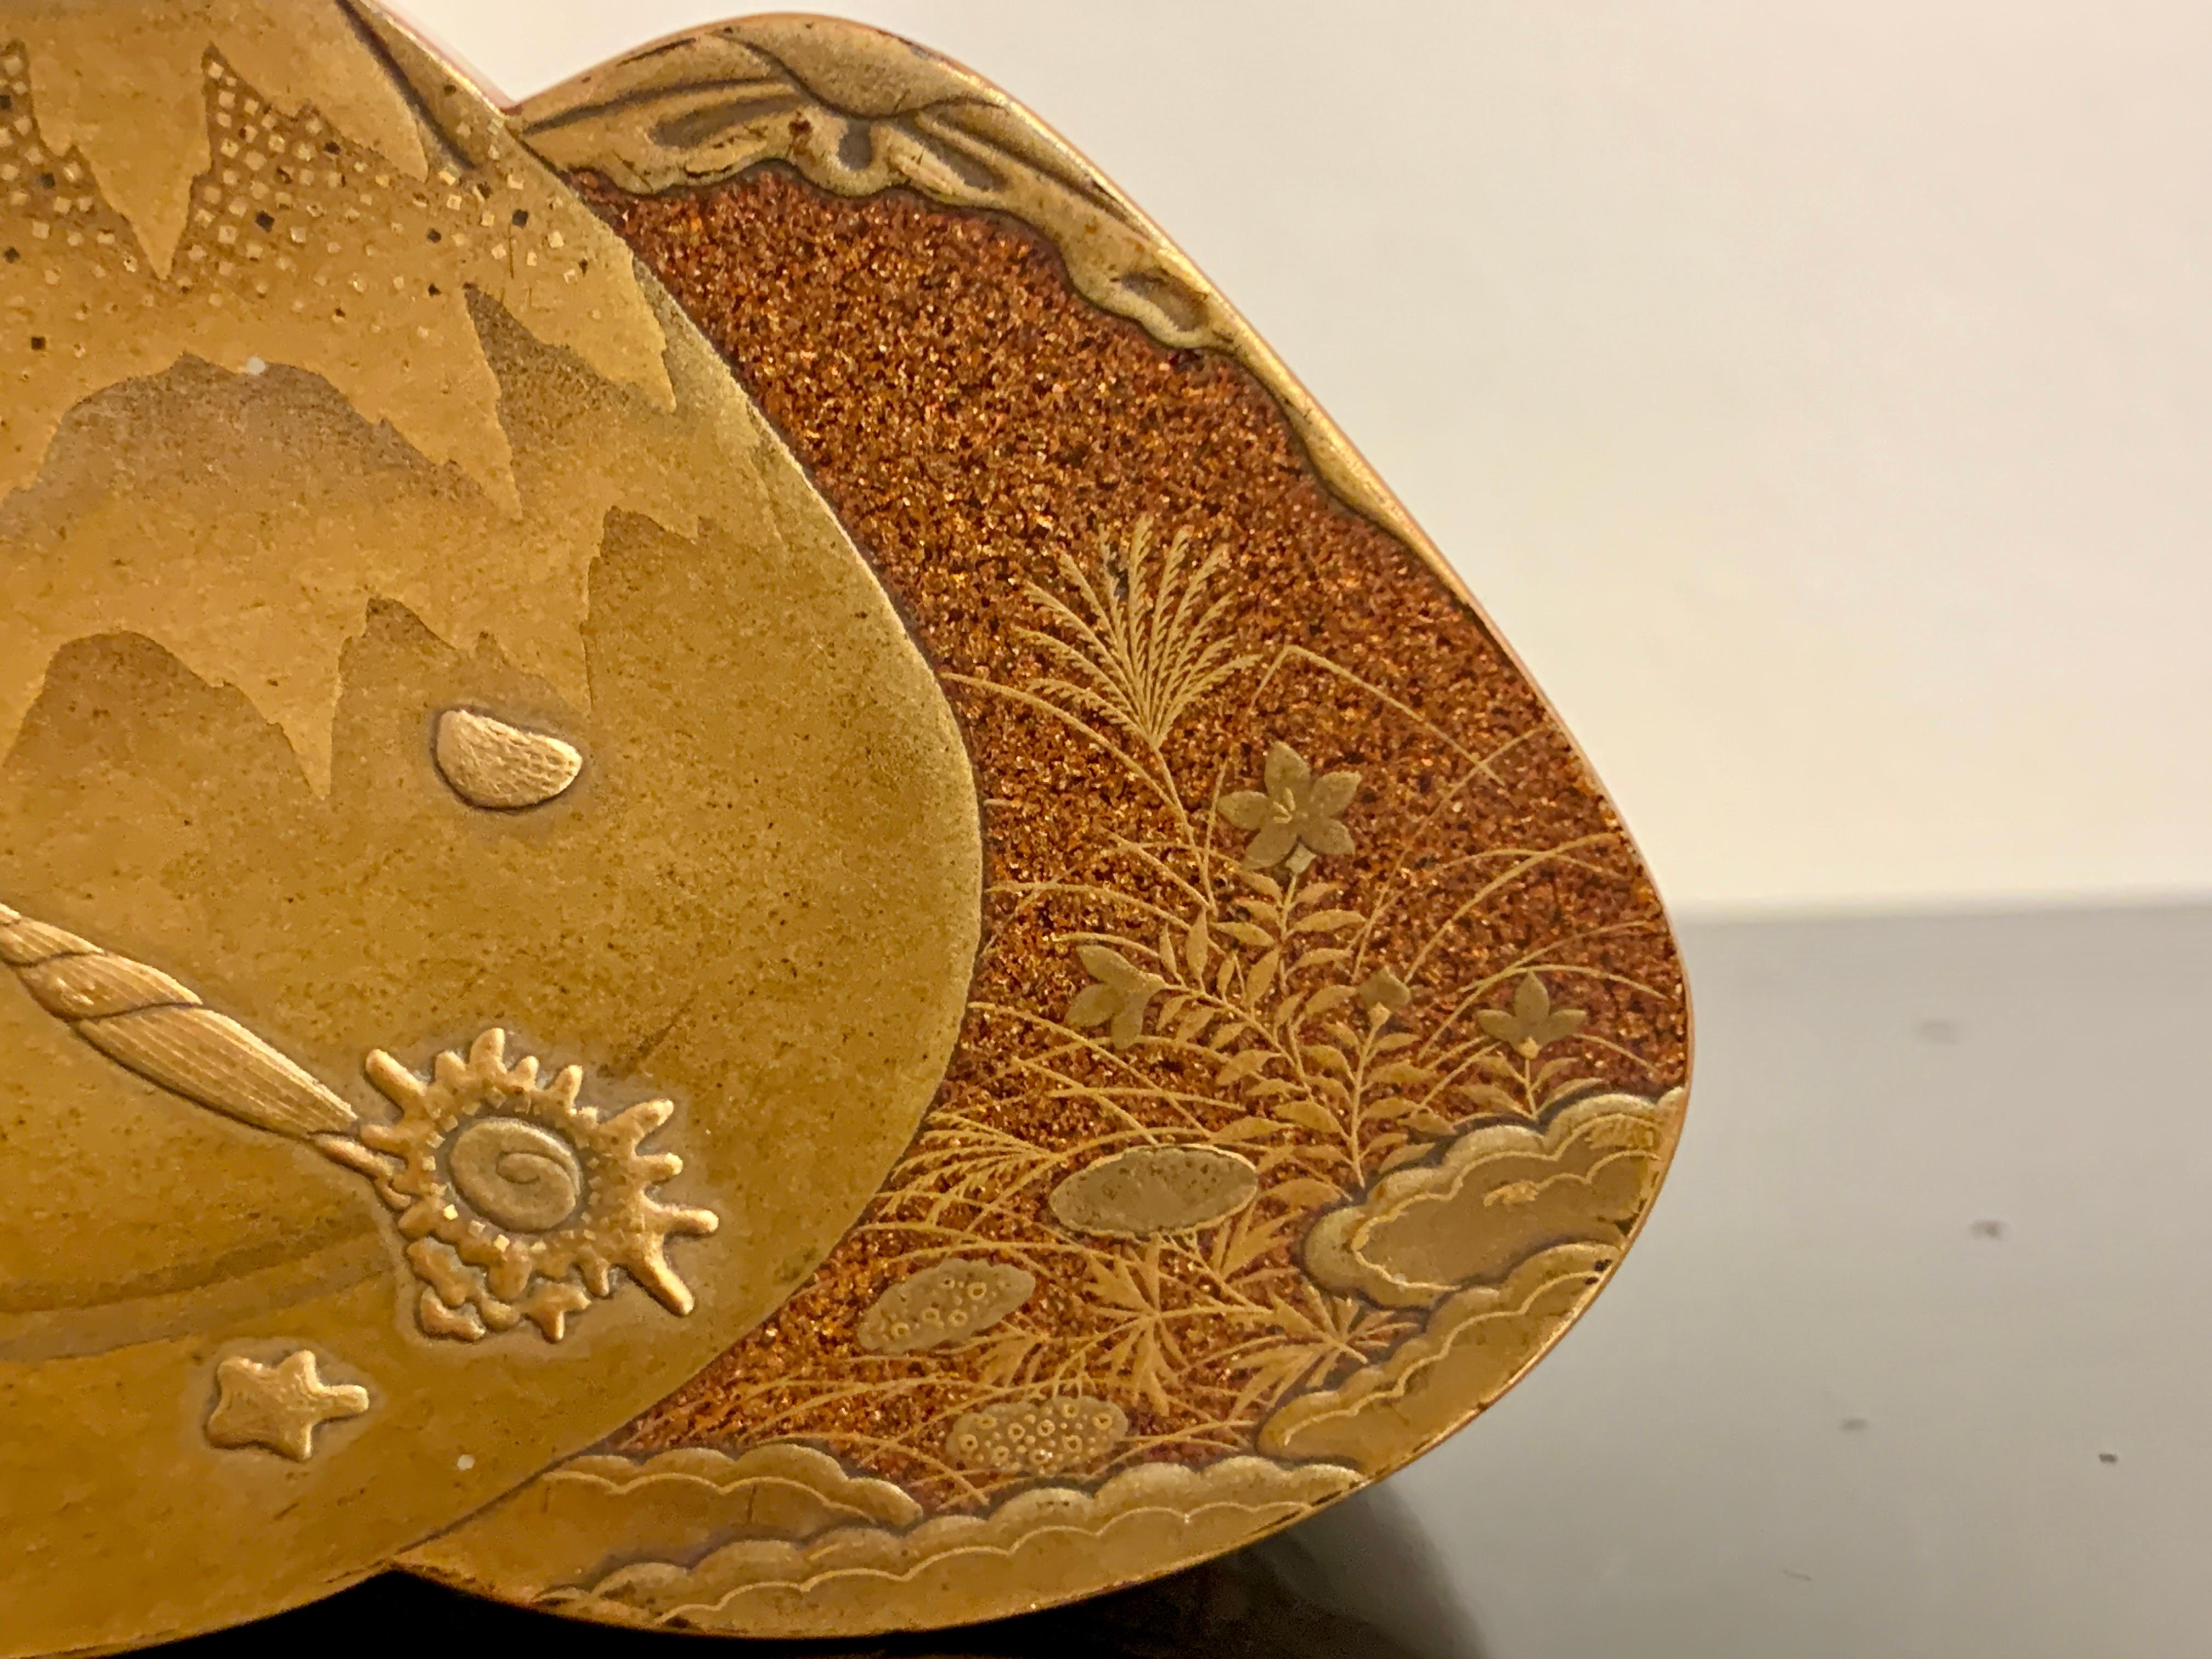 Hand-Crafted Japanese Lacquer Clam Shaped Incense Box, Kogo, by Zohiko, Meiji Period, Japan